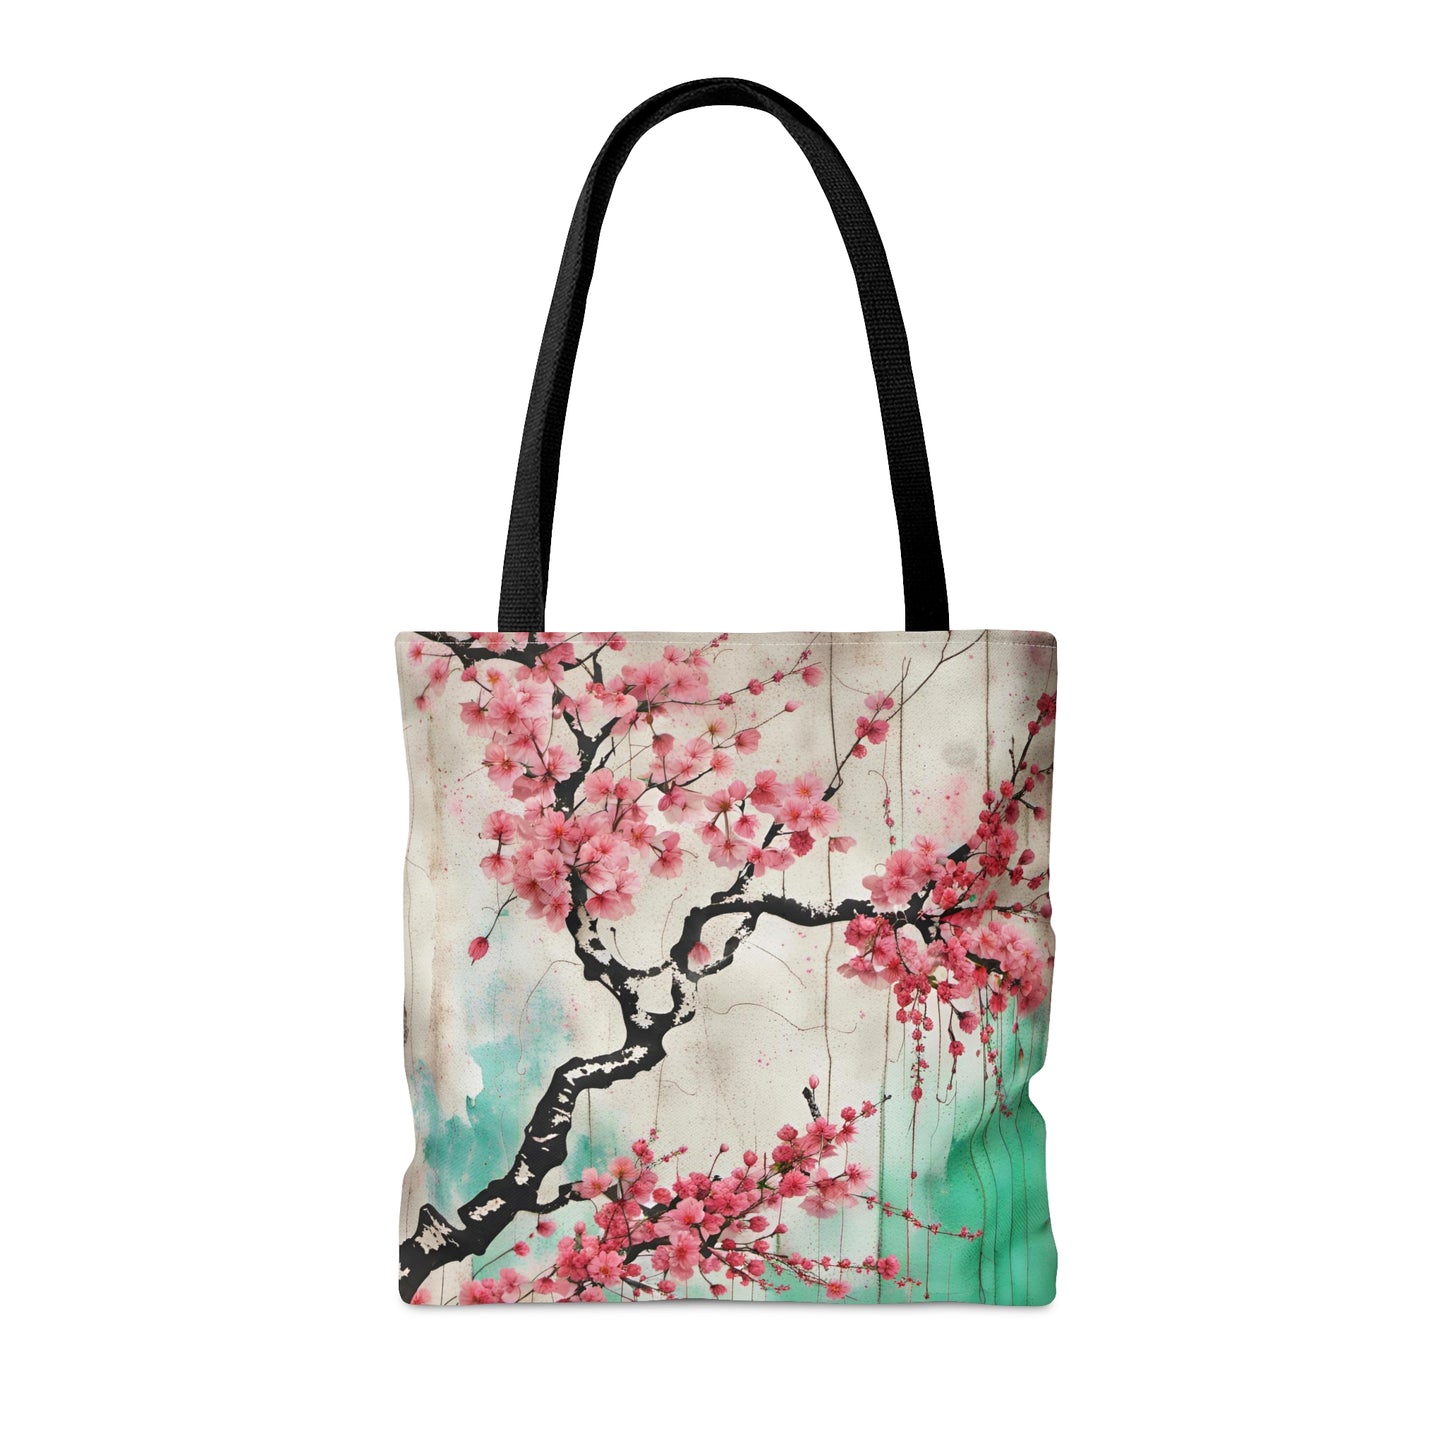 Floral Themed Bags and Travel Accessories - Street Style Cherry Blossoms Printed on Tote Bag Front